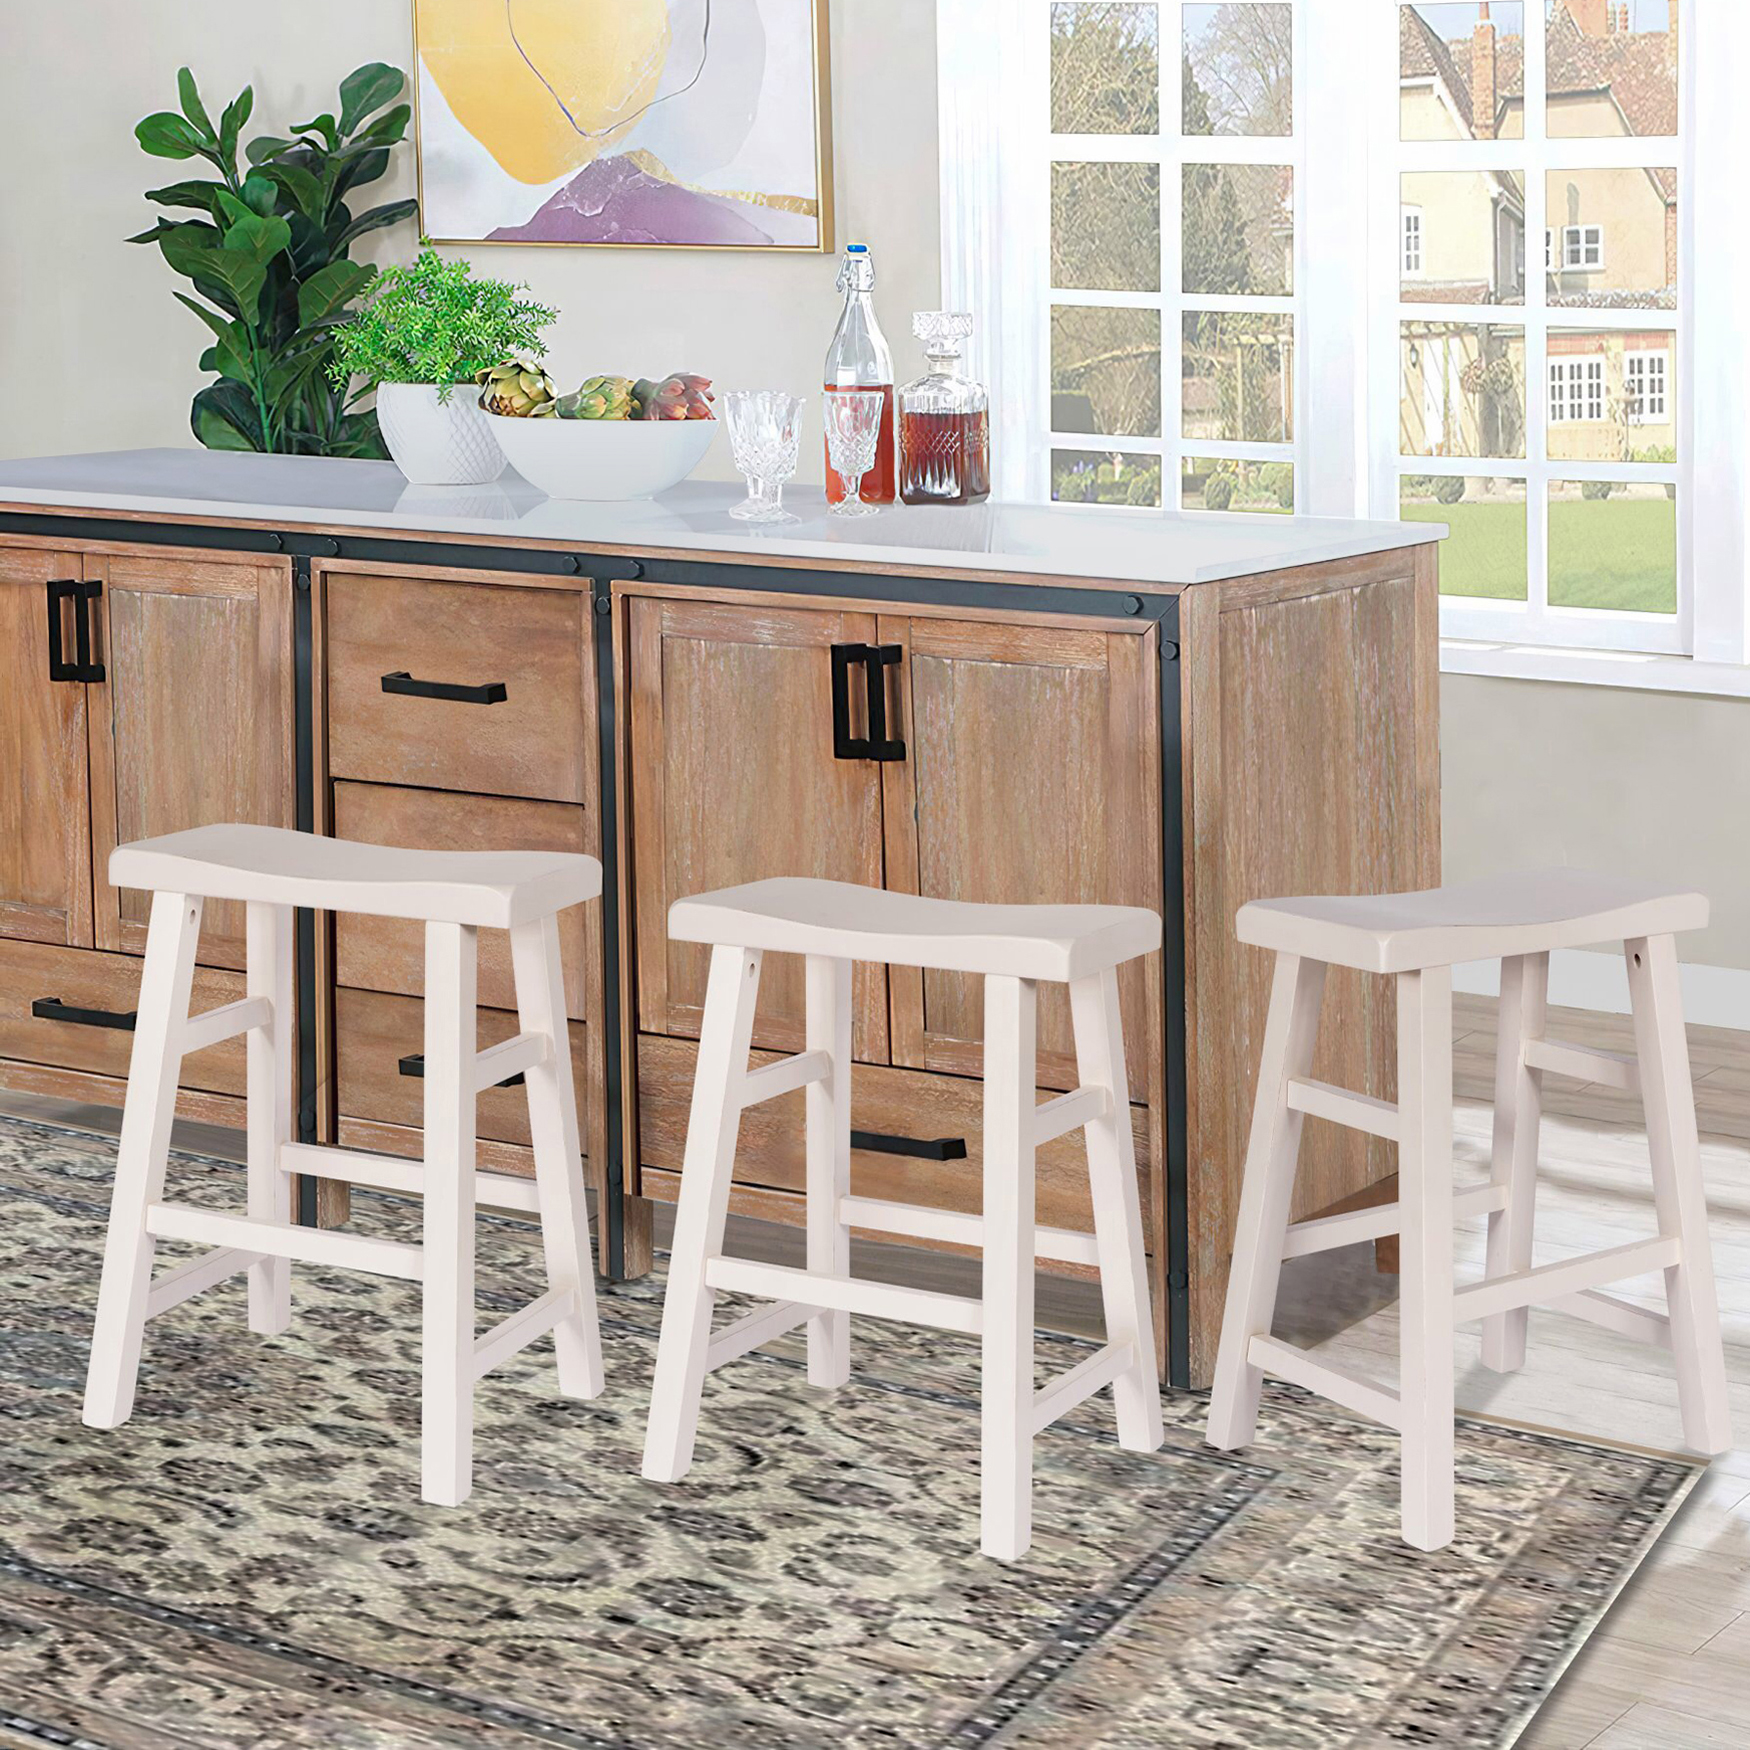 eHemco Heavy-Duty Solid Wood Saddle Seat Kitchen Counter Height Barstools, 24 Inches, White, Set of 3 - image 4 of 6